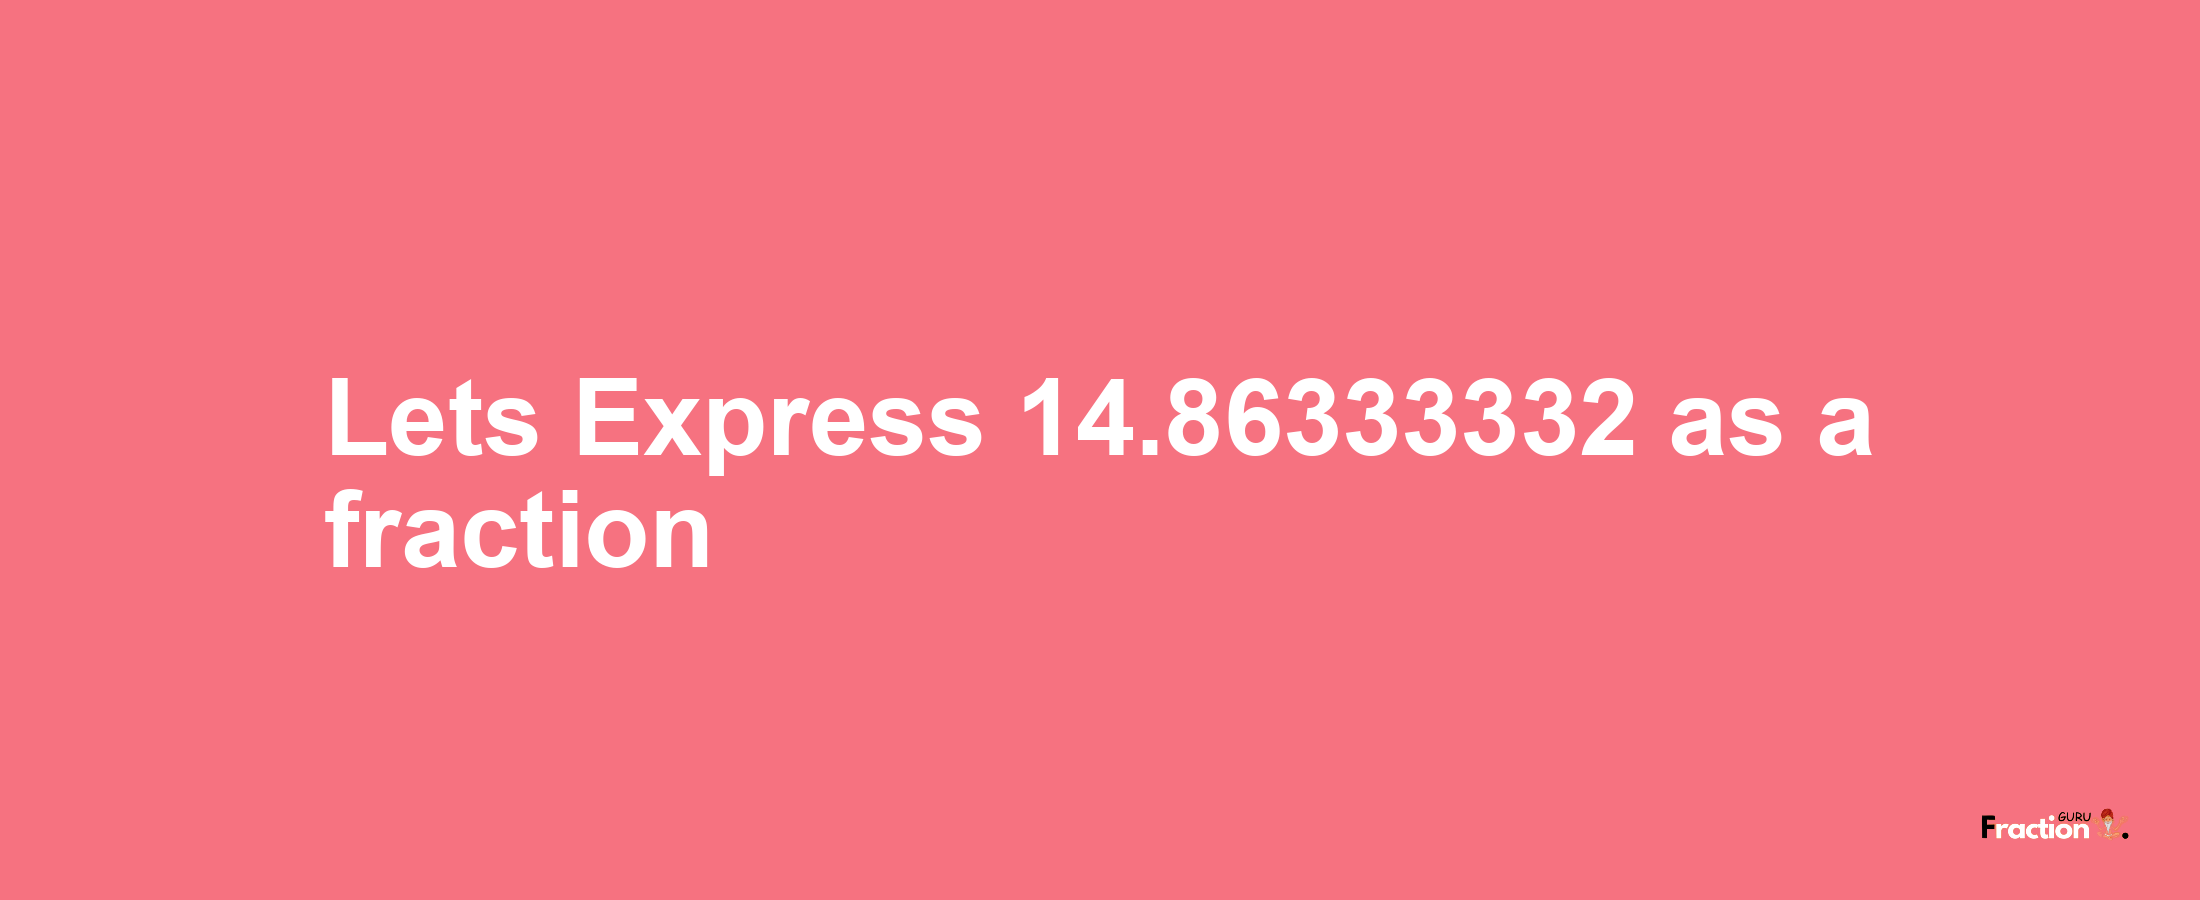 Lets Express 14.86333332 as afraction